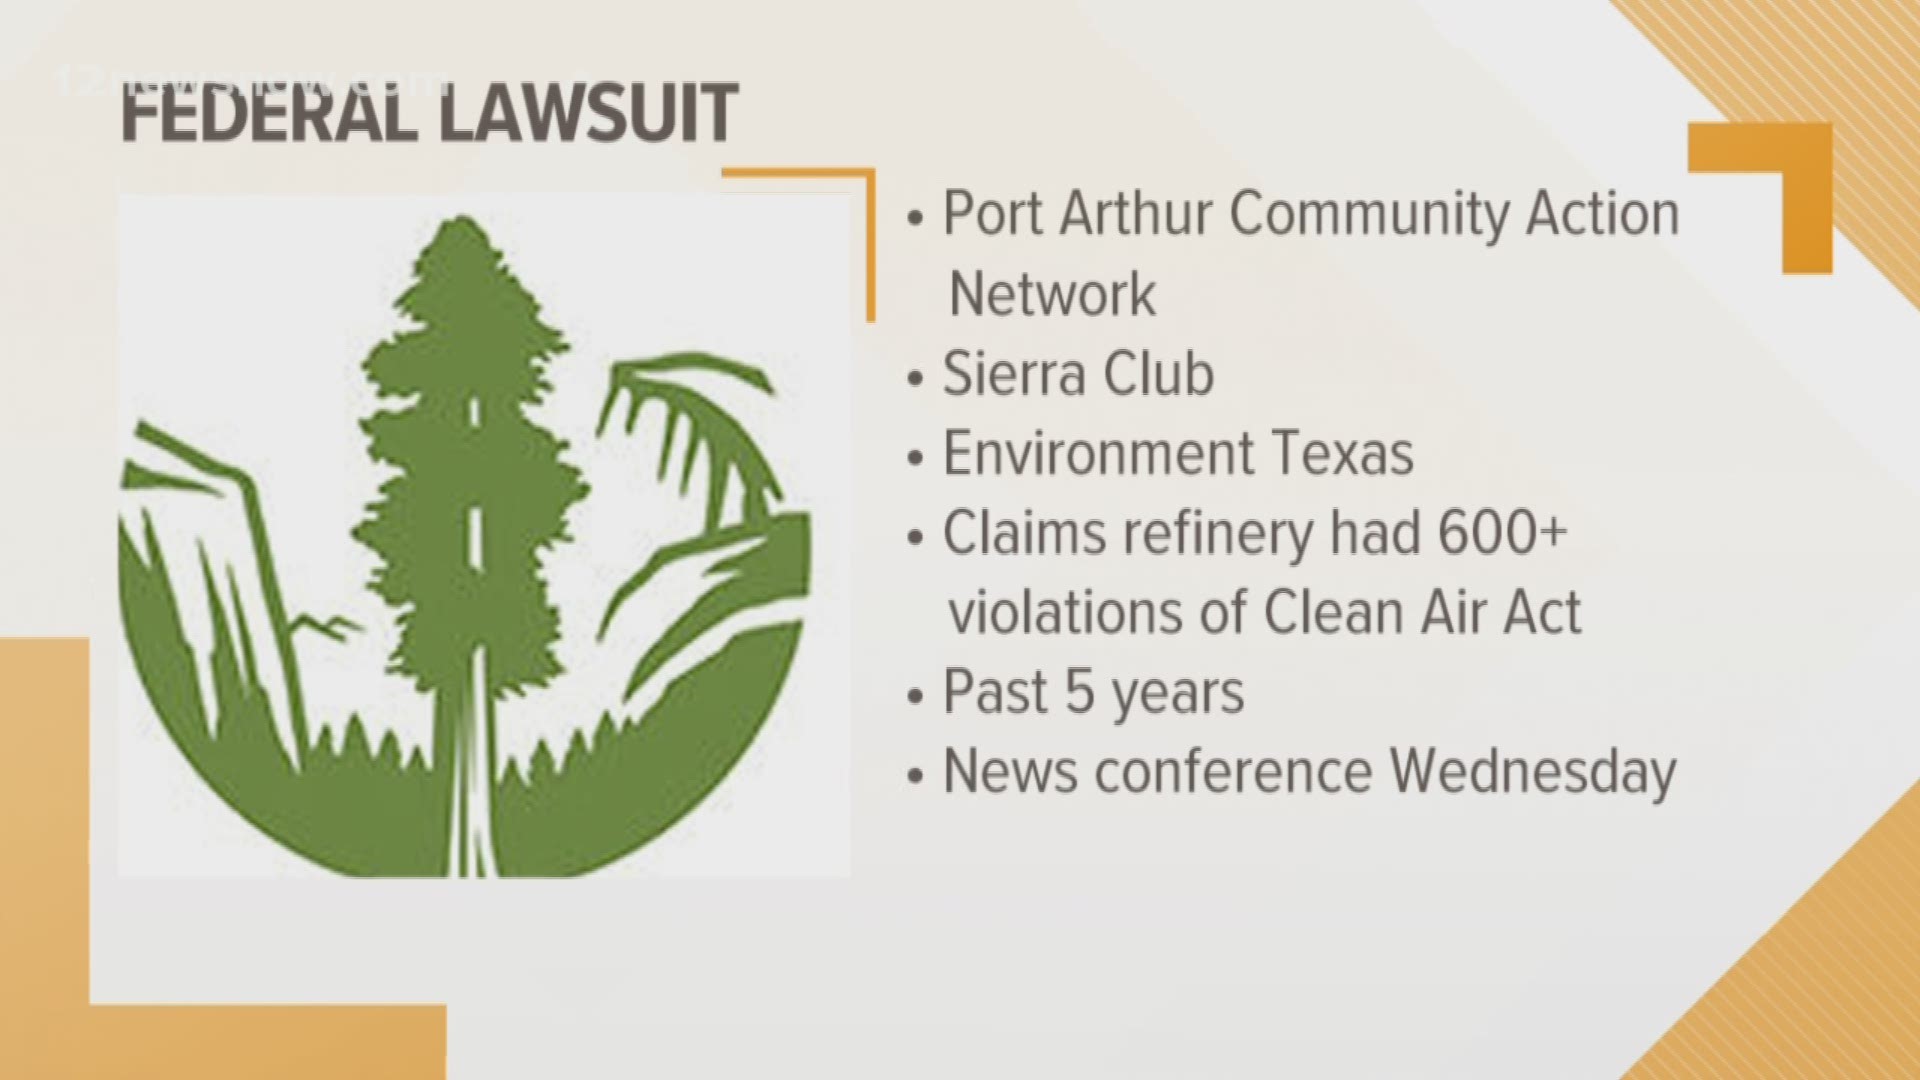 The Port Arthur "Community Action Network", the "Sierra Club" and the Environment Texas" all plan on filing the lawsuit. These violations have taken place over the last five years.